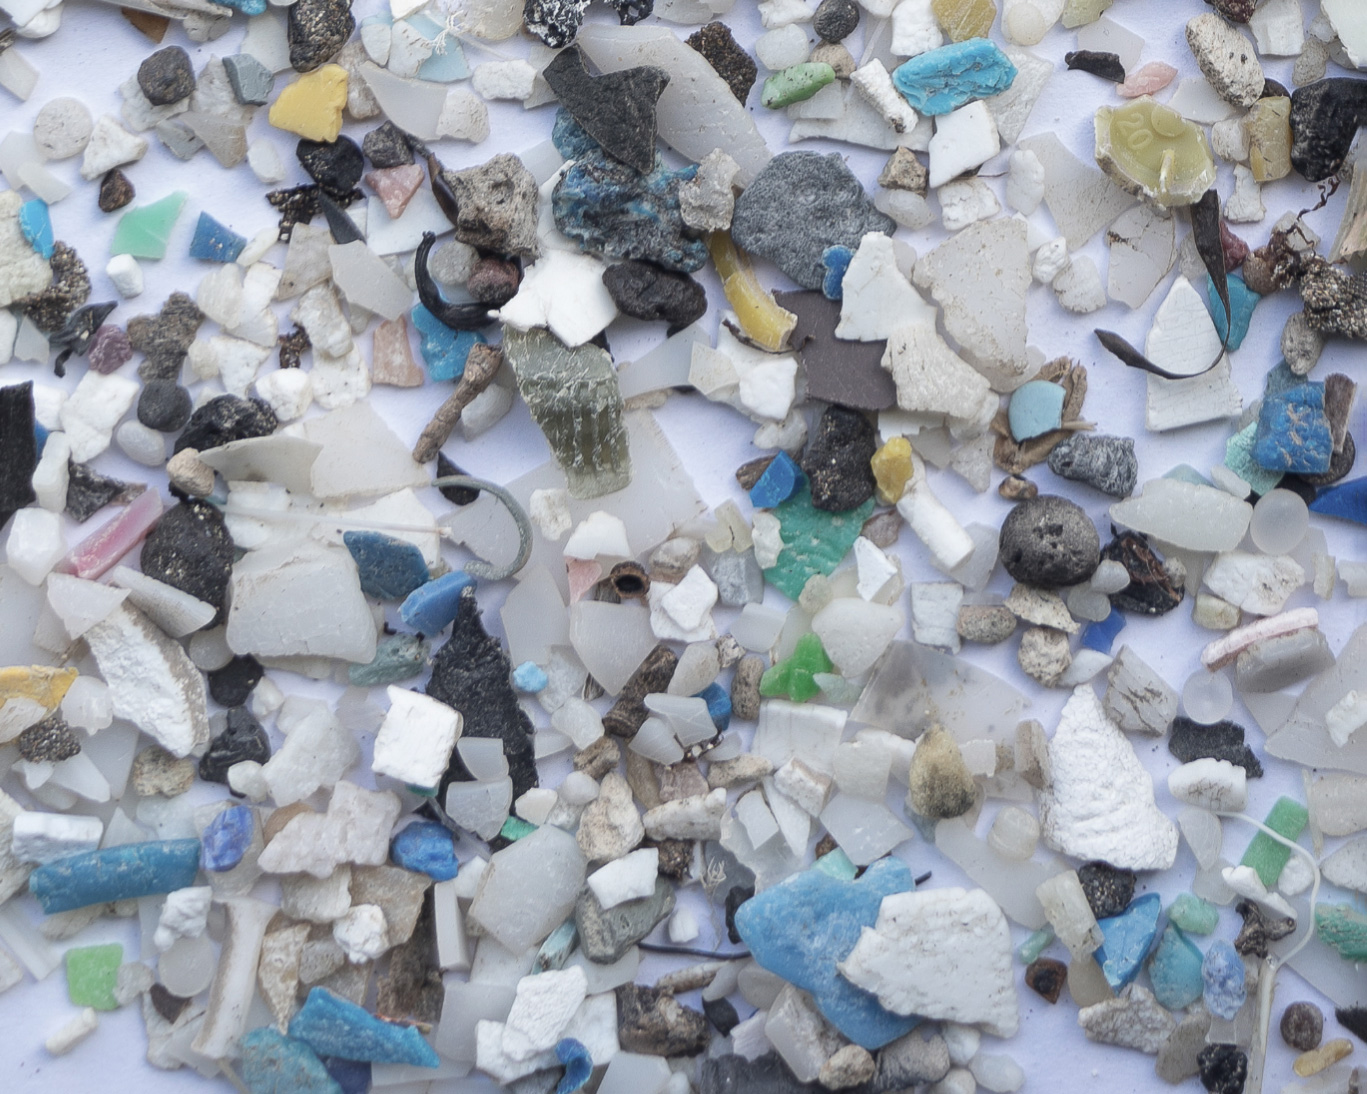 What’s The Problem With Microplastics?